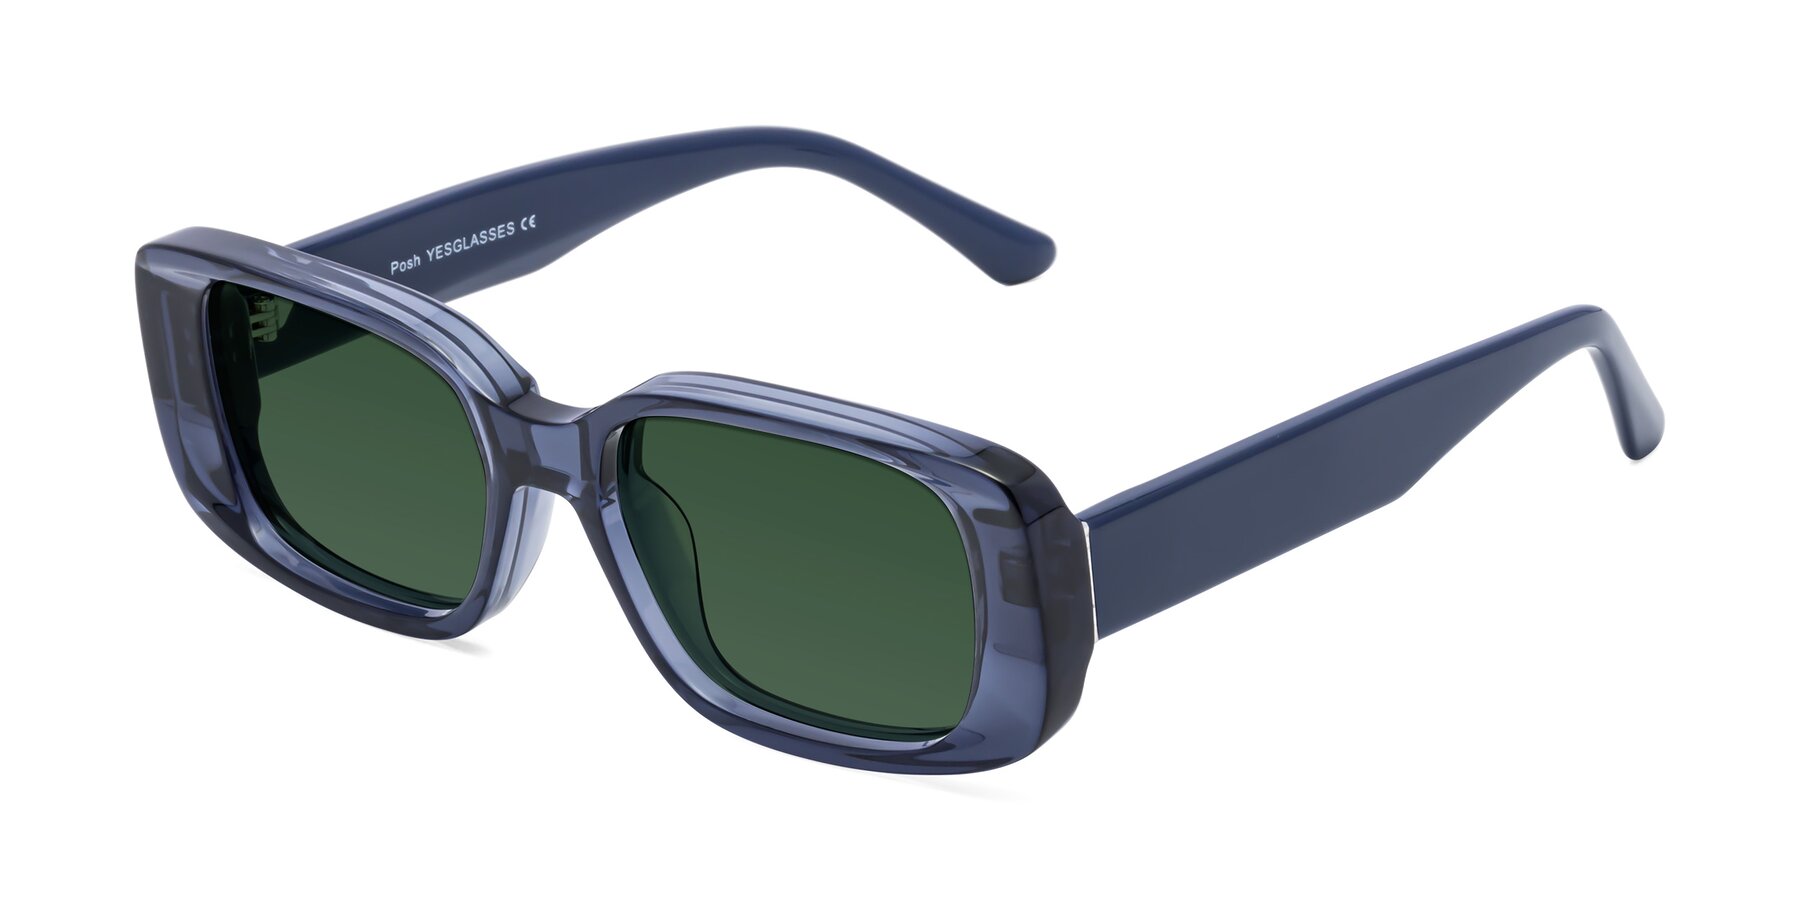 Angle of Posh in Translucent Blue with Green Tinted Lenses